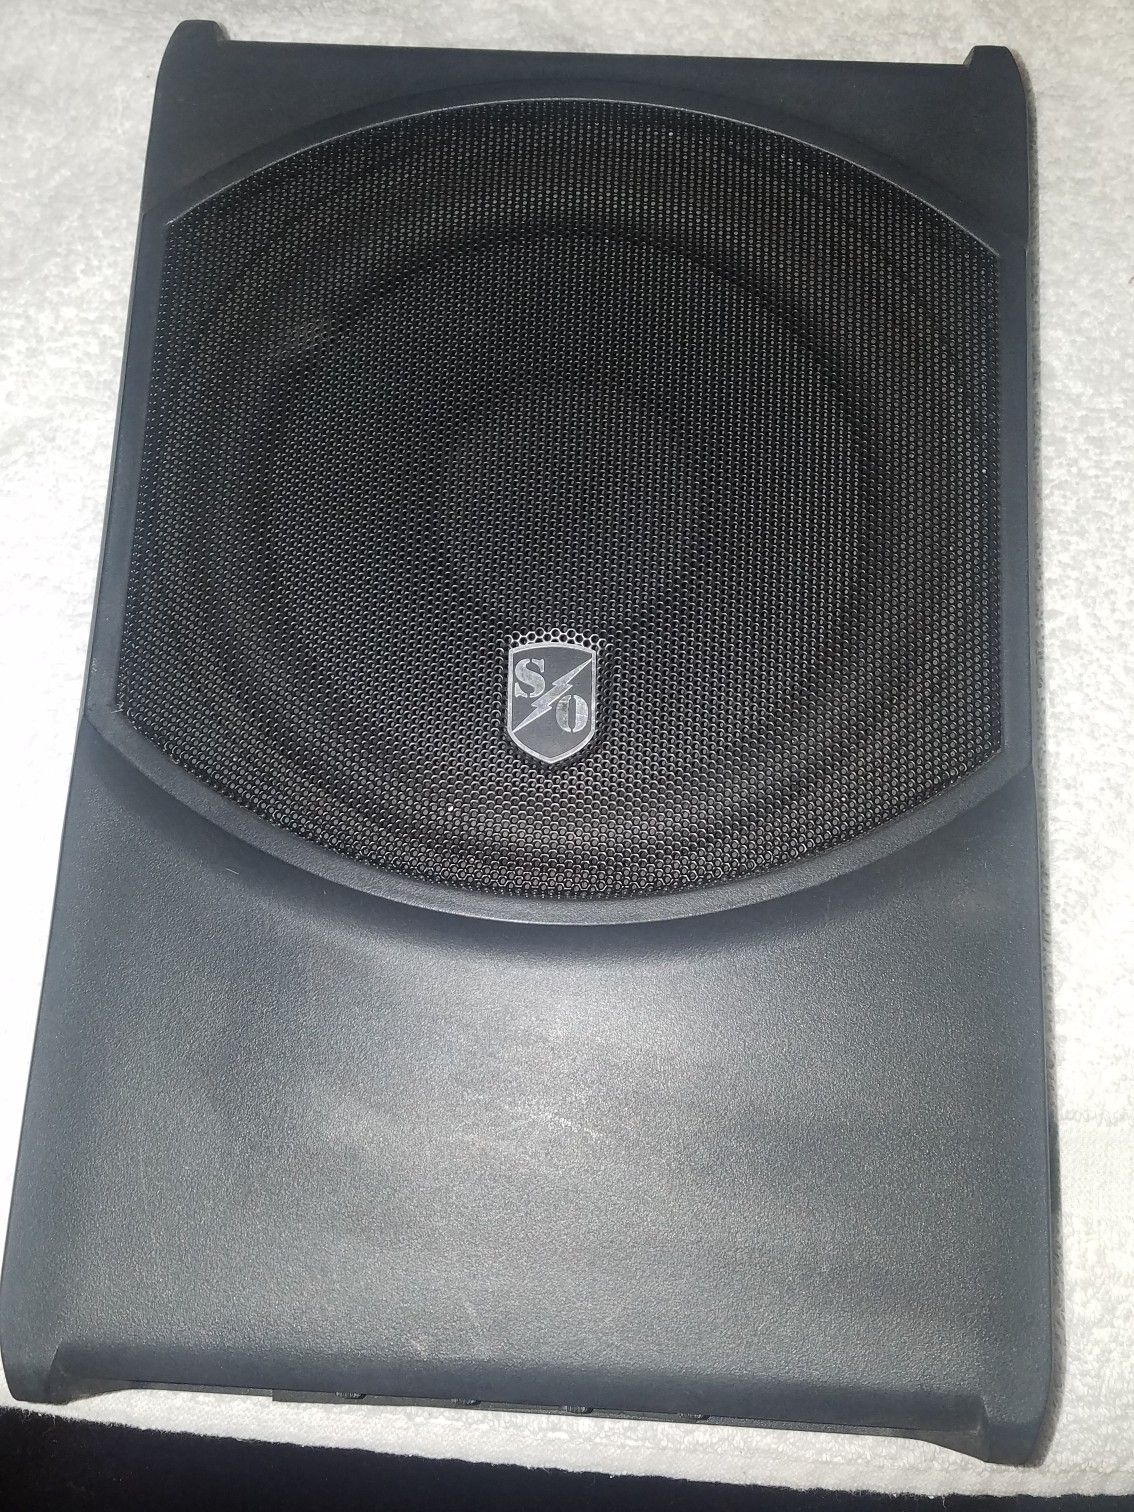 Nice Compact Powered 8" Subwoofer 250 Watts Total!